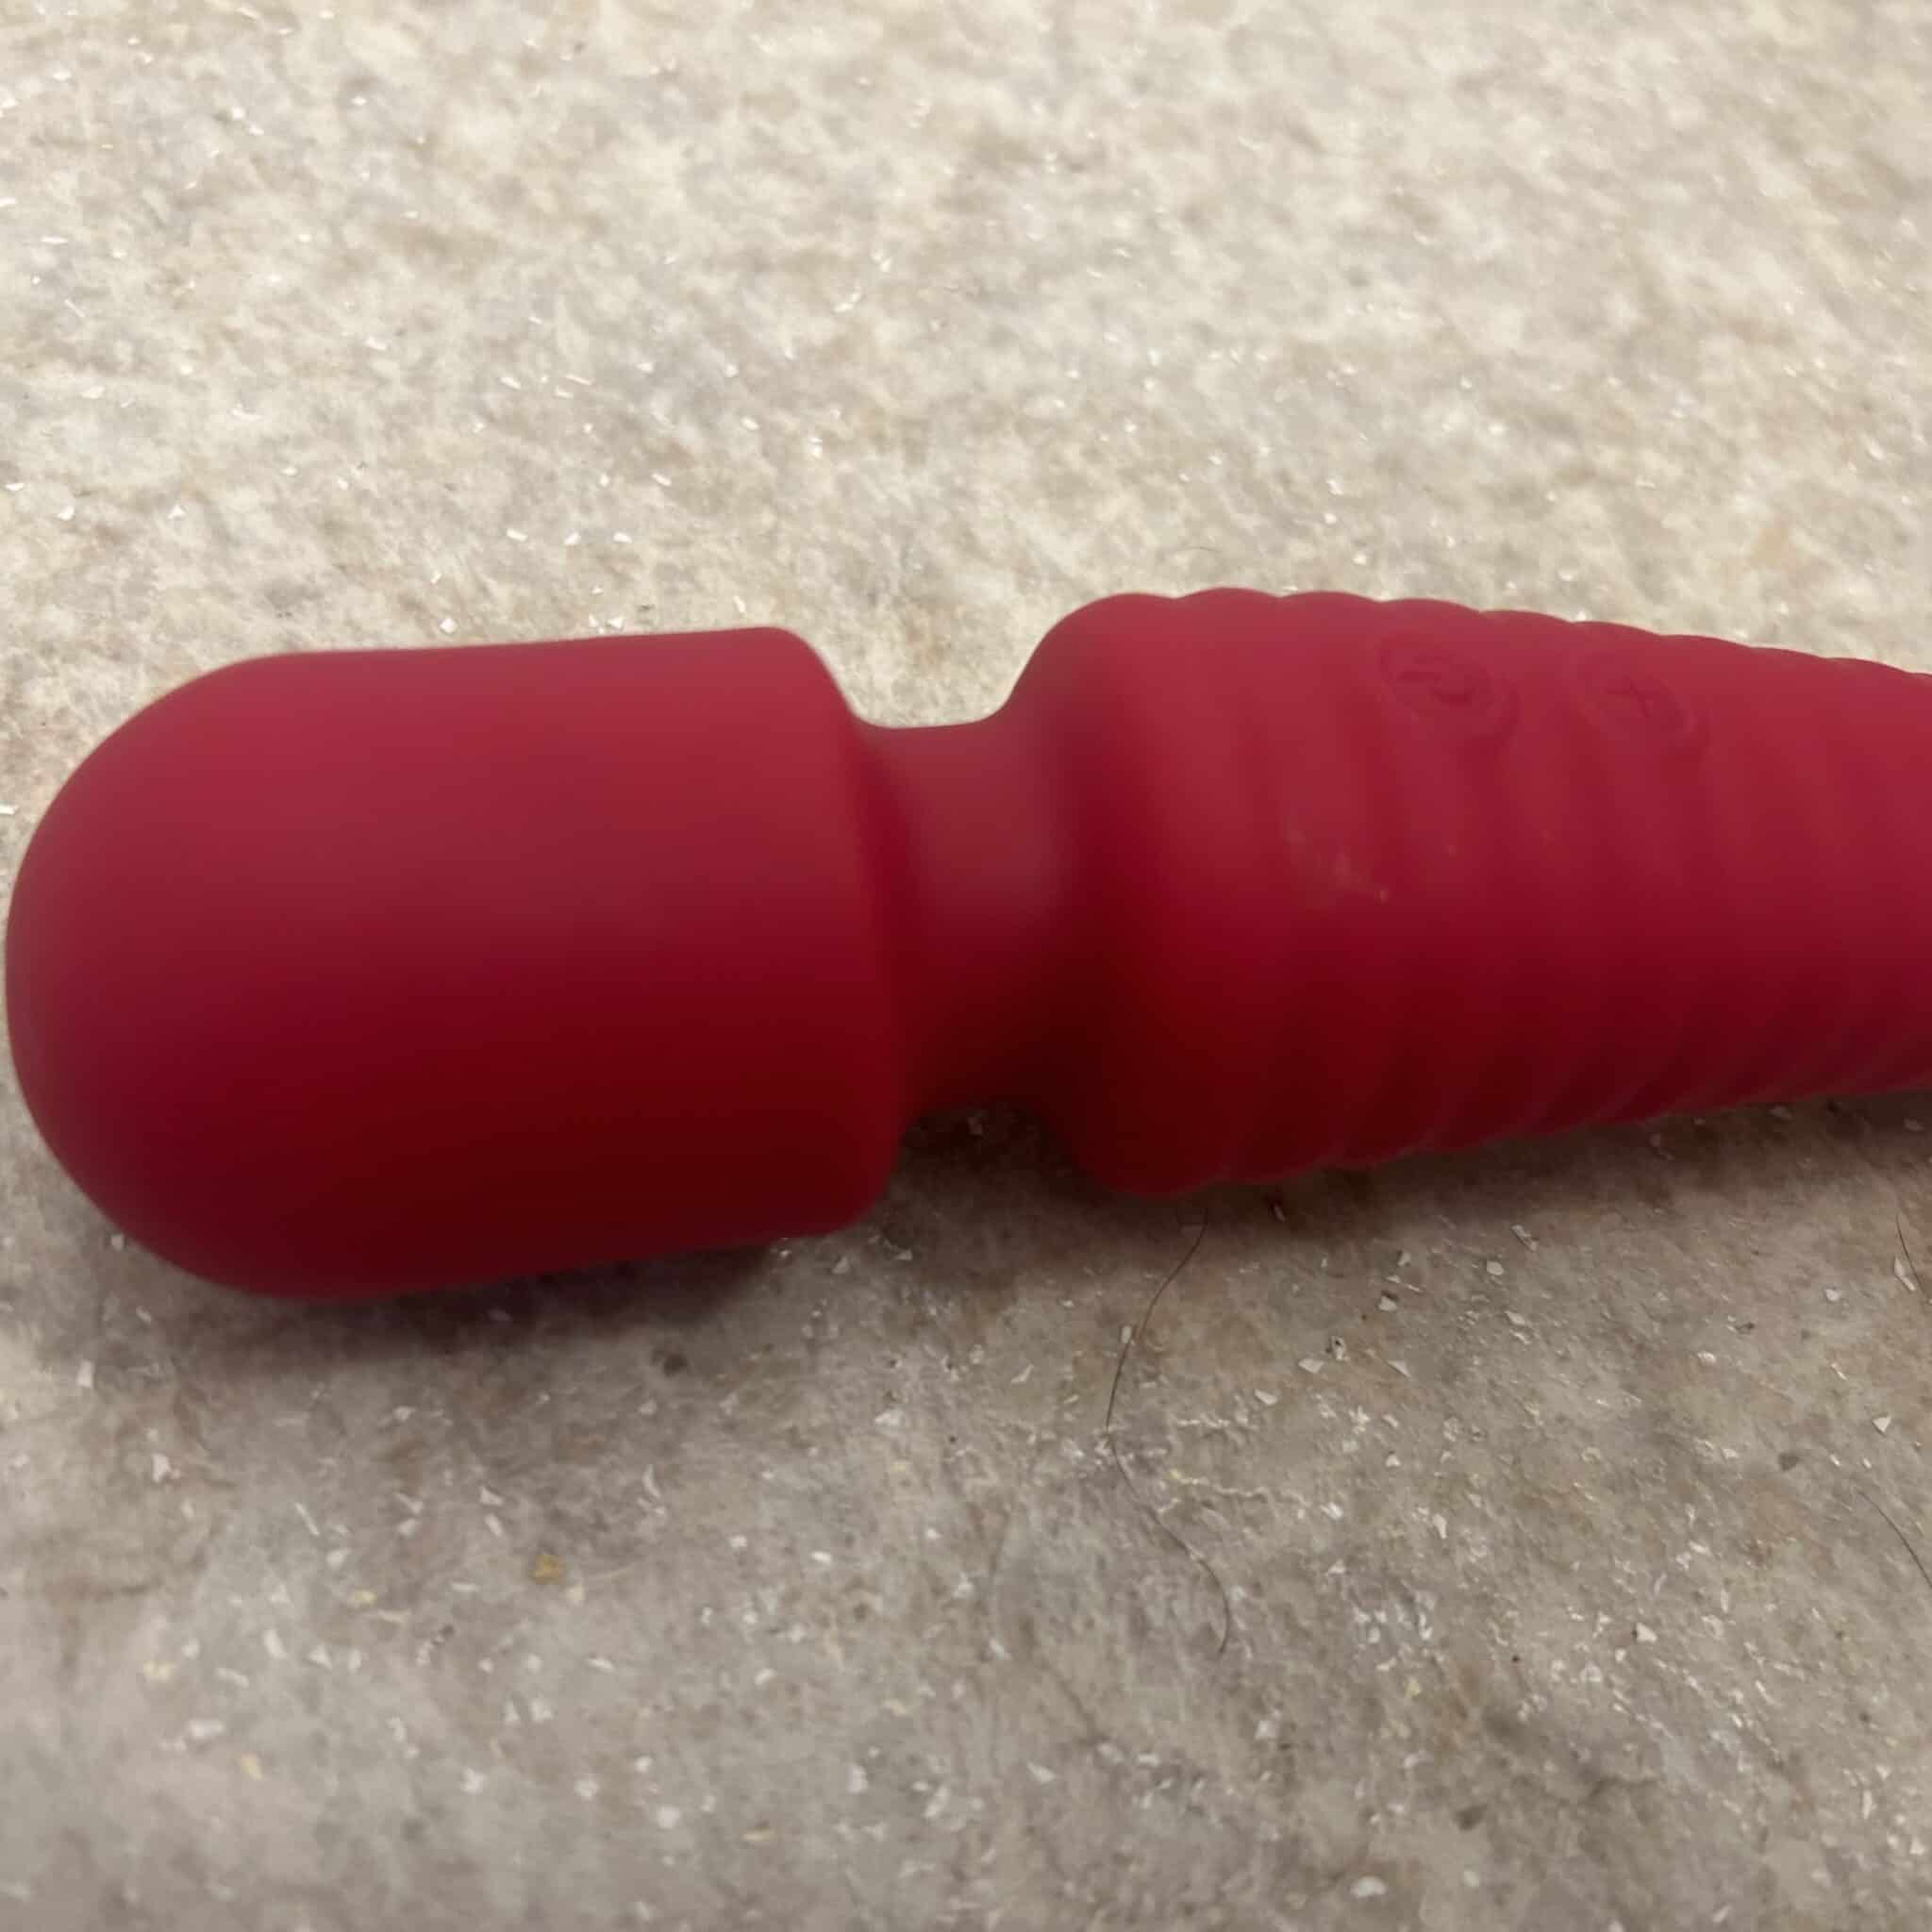 Lovehoney Dream Wand — Test &amp; Review Quality Verdict: How does Lovehoney Dream Wand — Test &amp; Review Measure Up?